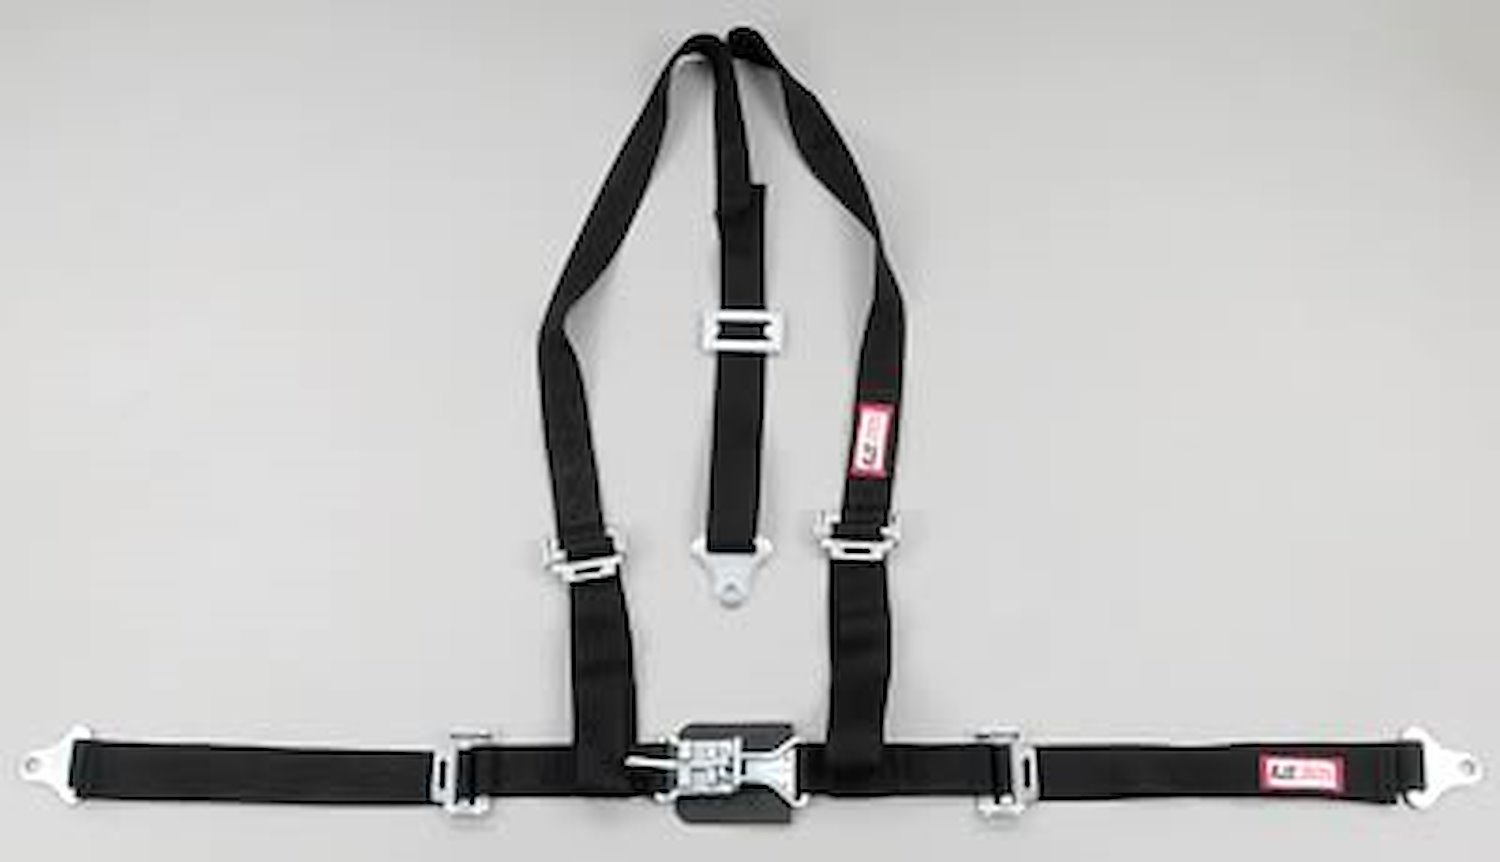 NON-SFI L&L HARNESS 2 PULL UP Lap Belt SNAP SEWN IN 2 S.H. Individual ROLL BAR Mount WRAP/SNAP BLUE